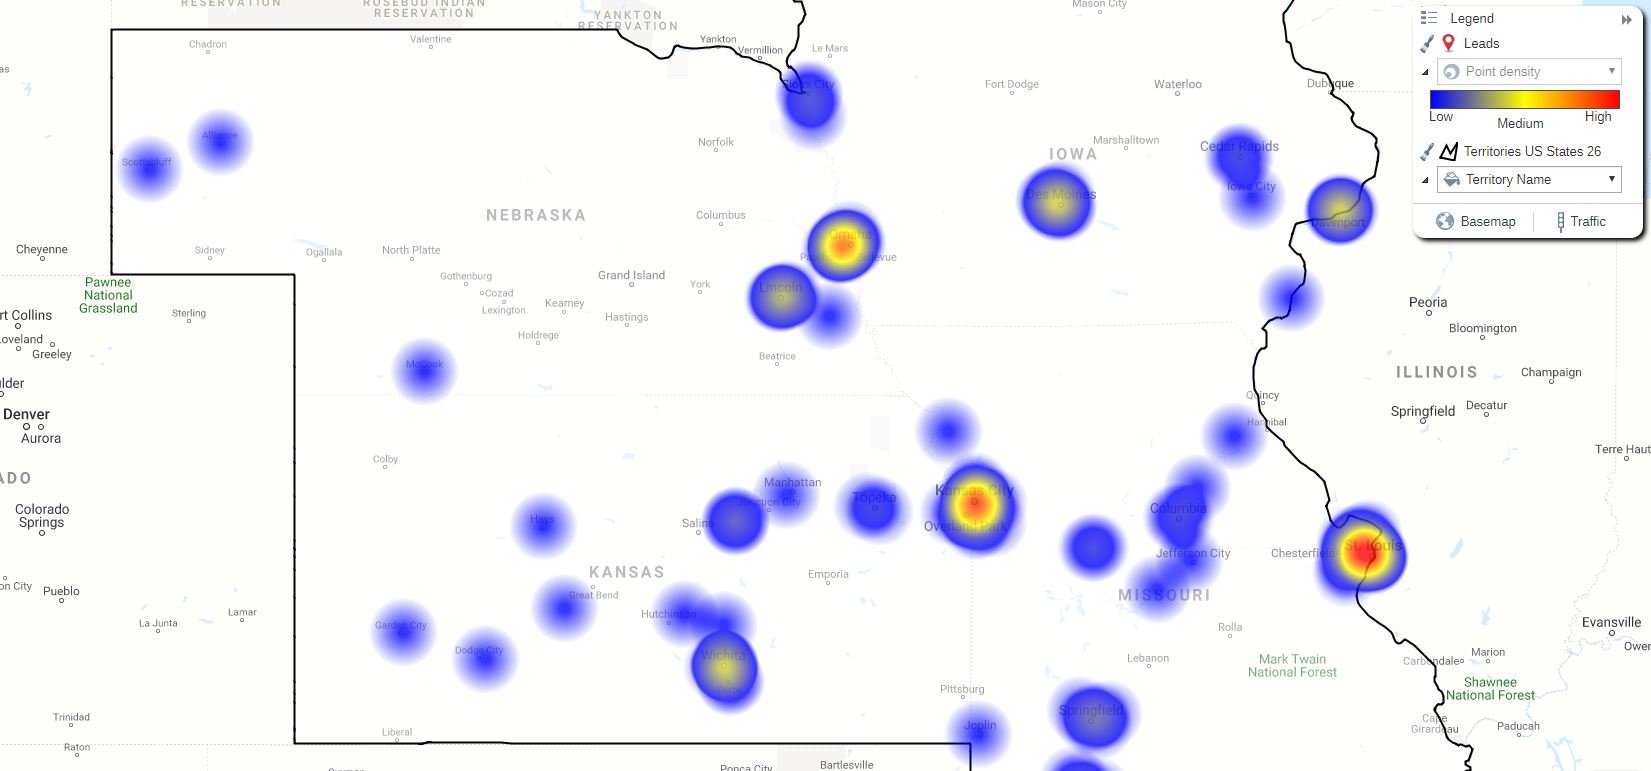 Hot spot heat map opportunity clusters